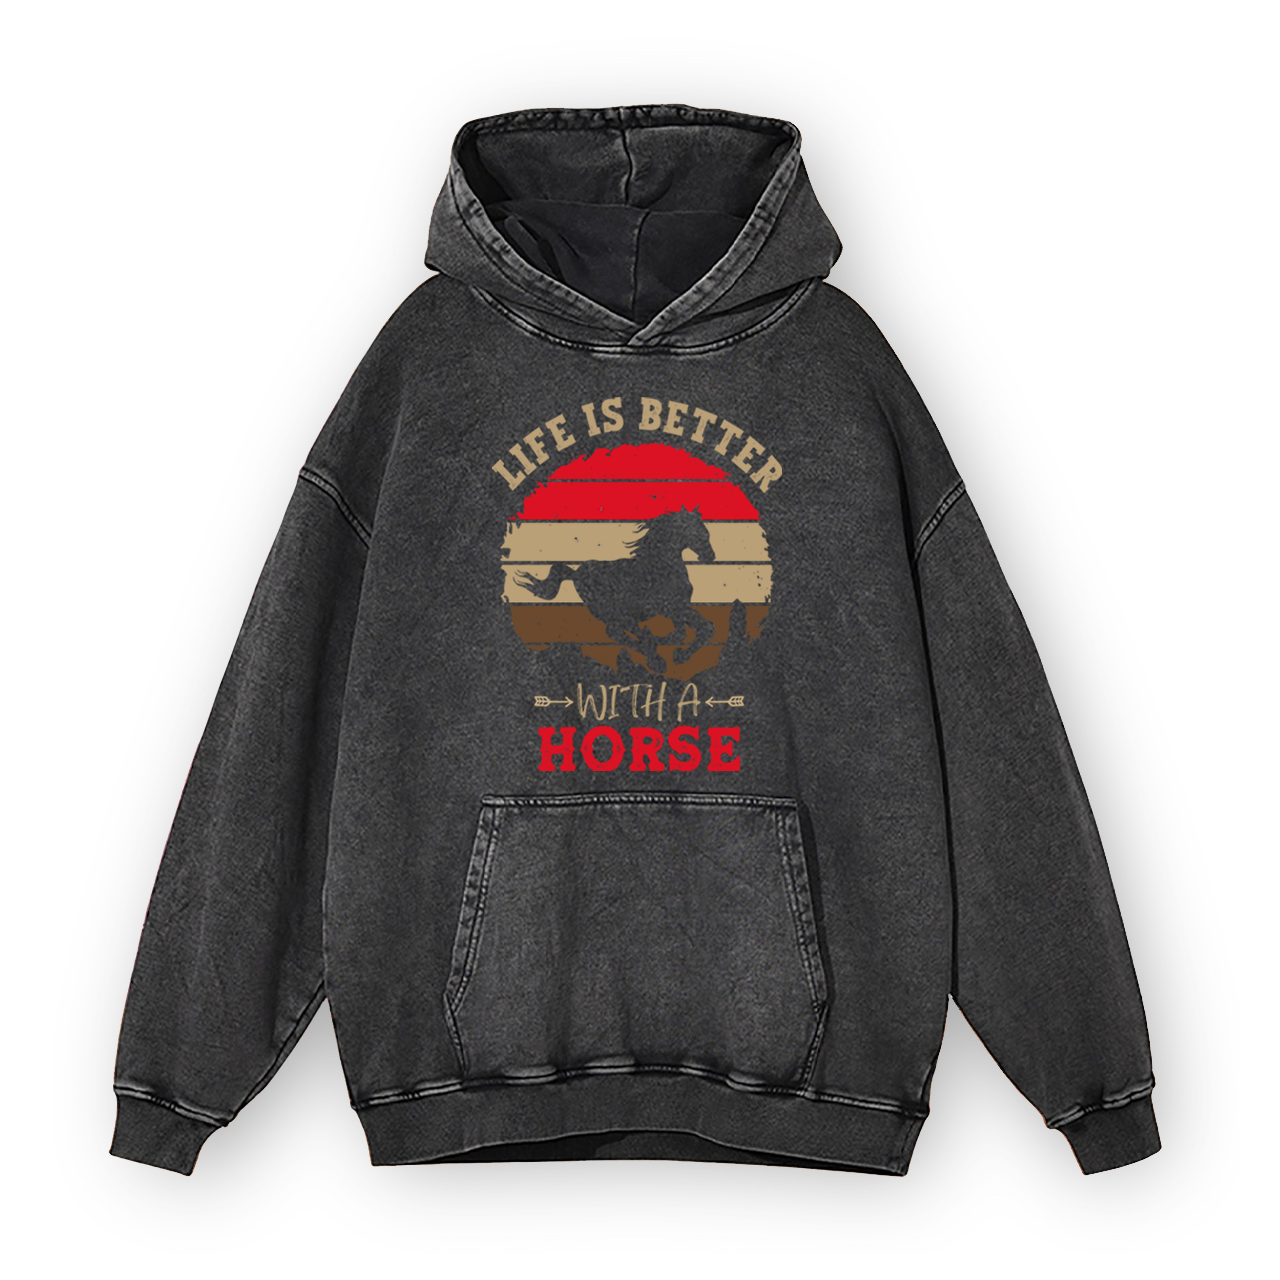 Life Is Better With A Horse Garment-Dye Hoodies